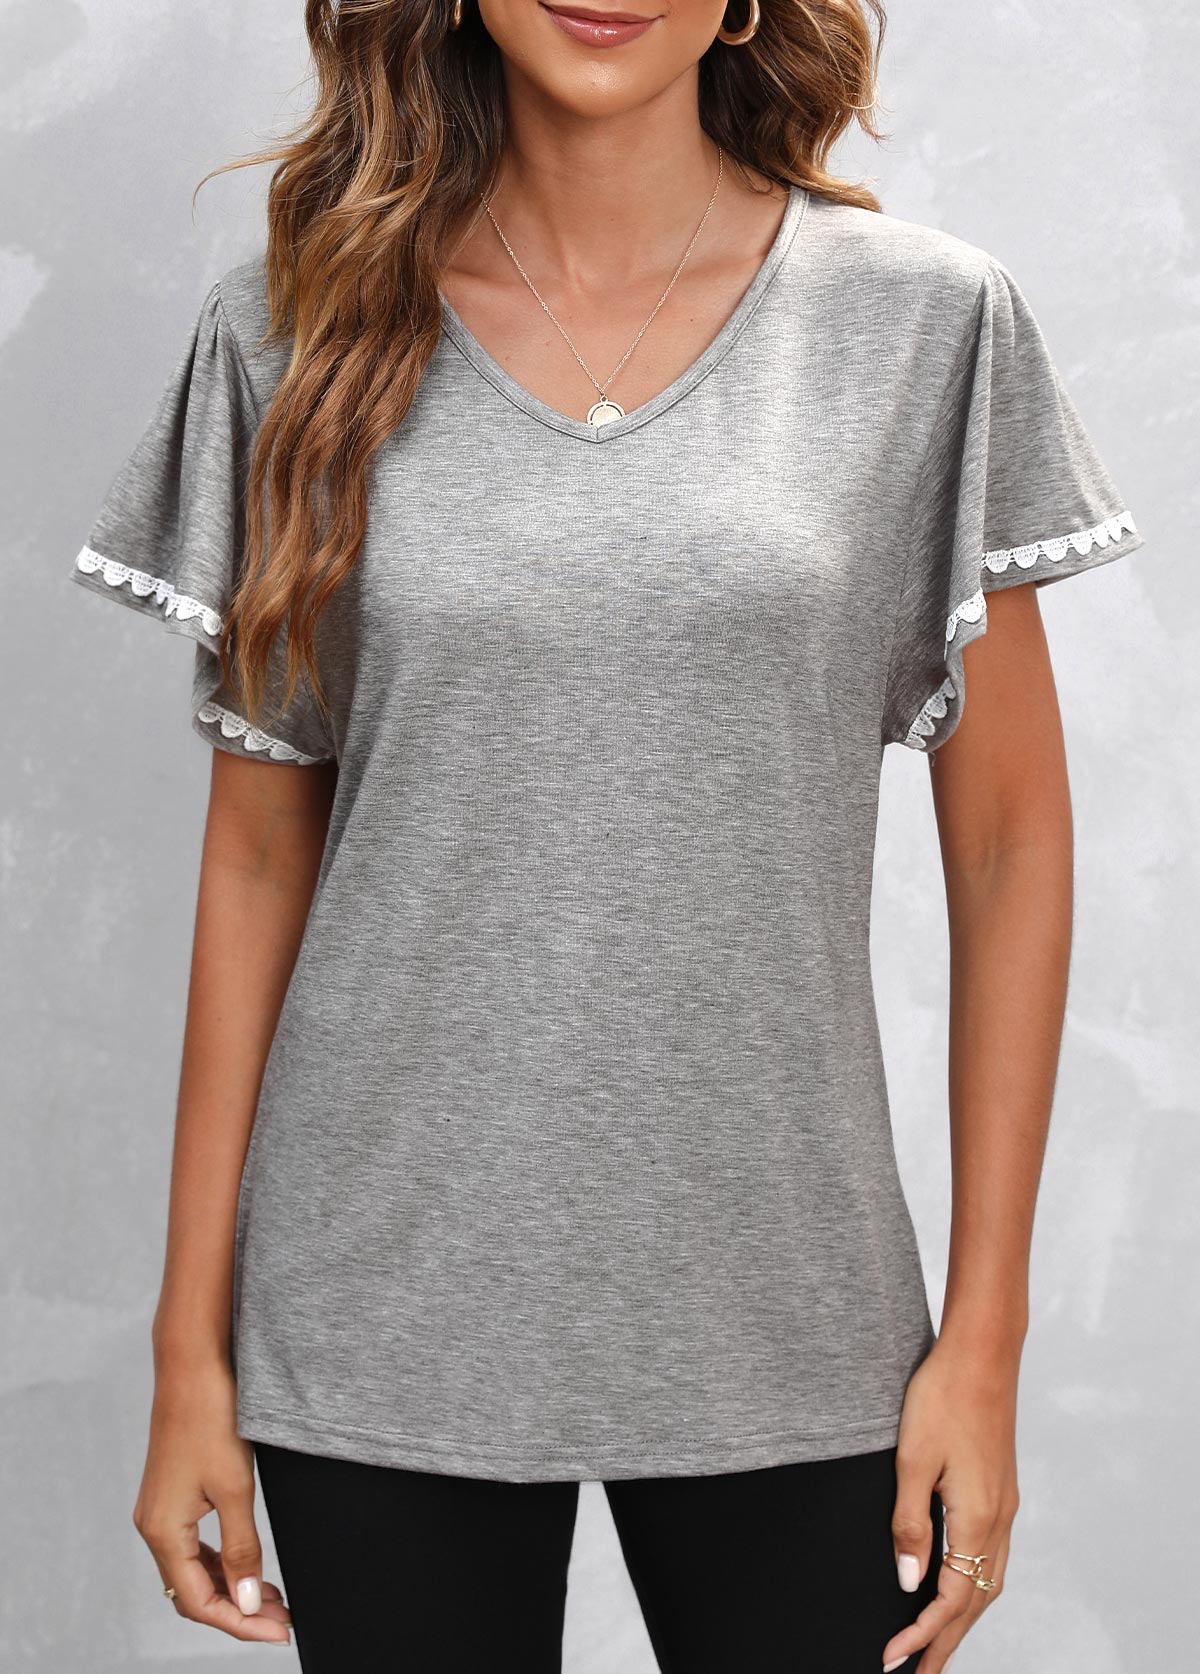 Butterfly Sleeve Grey Lace Stitching T Shirt